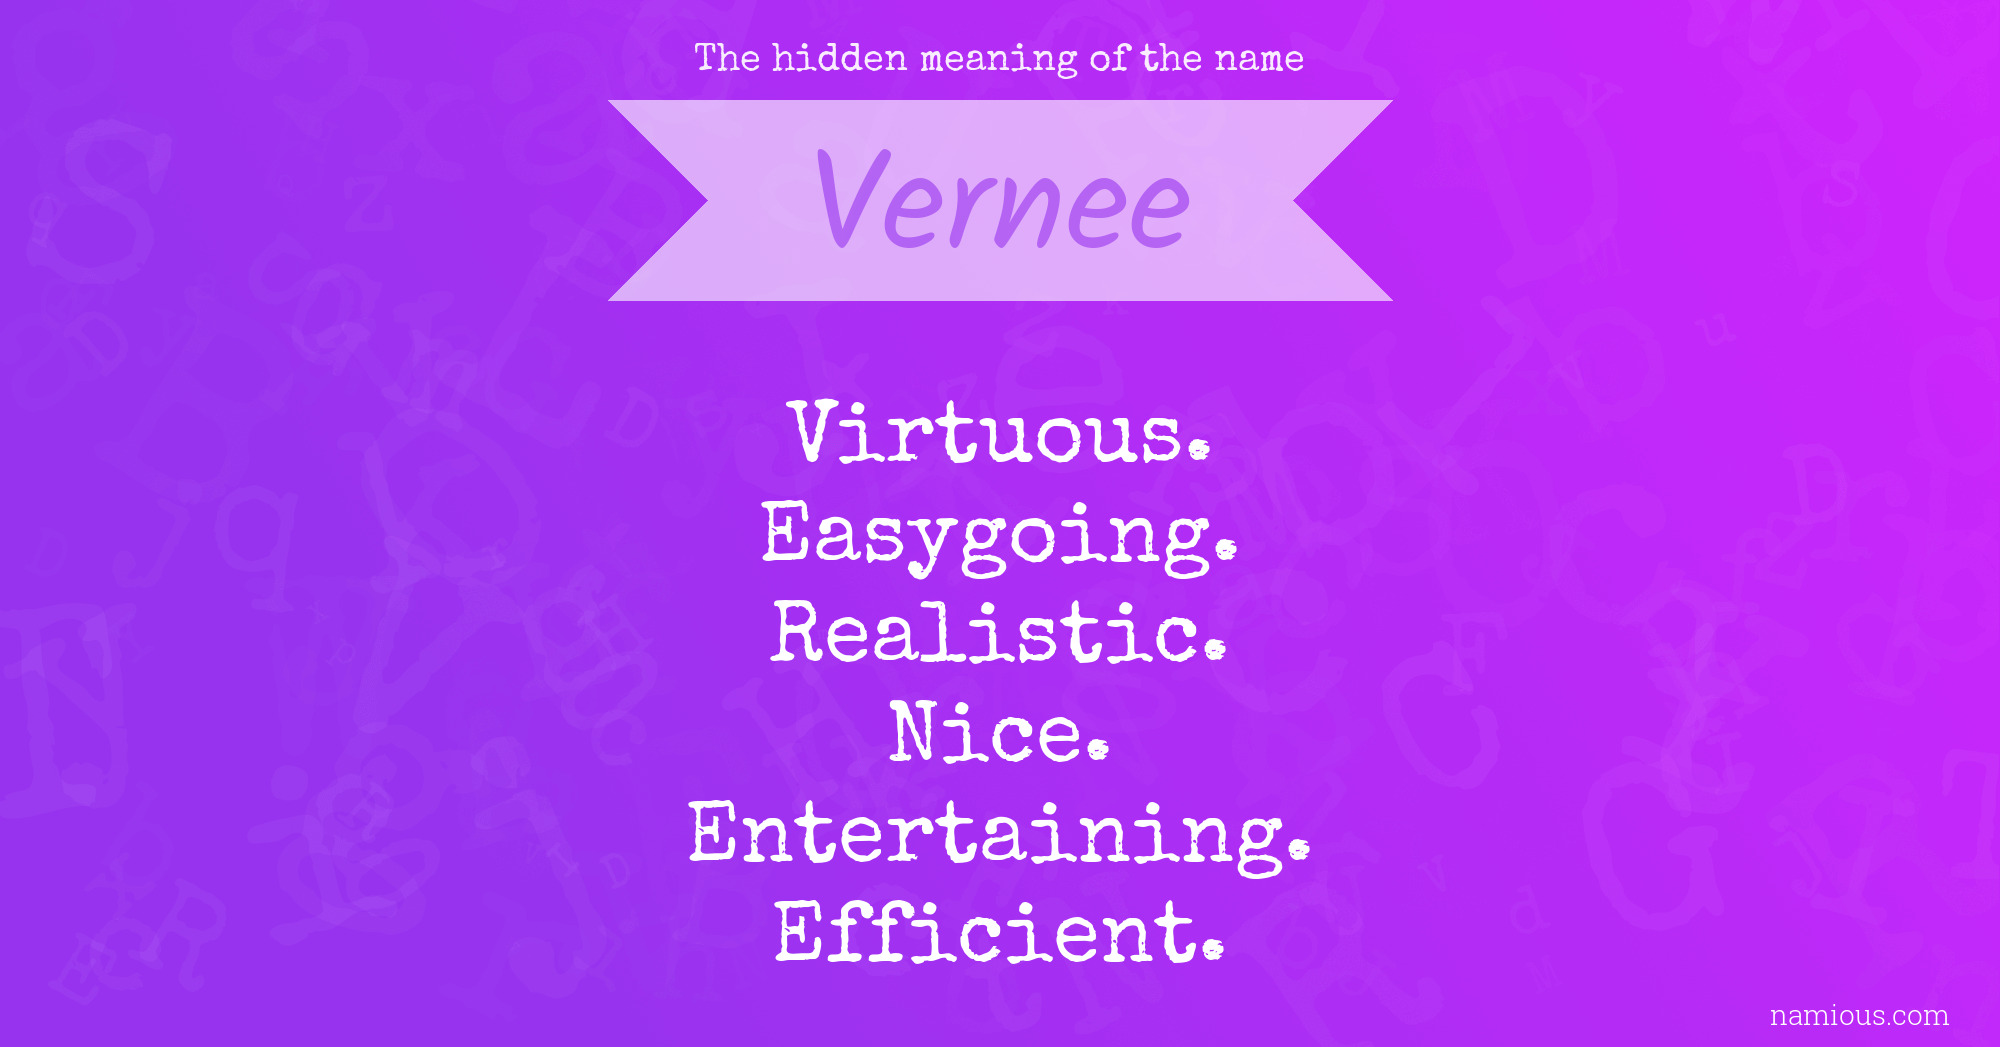 The hidden meaning of the name Vernee